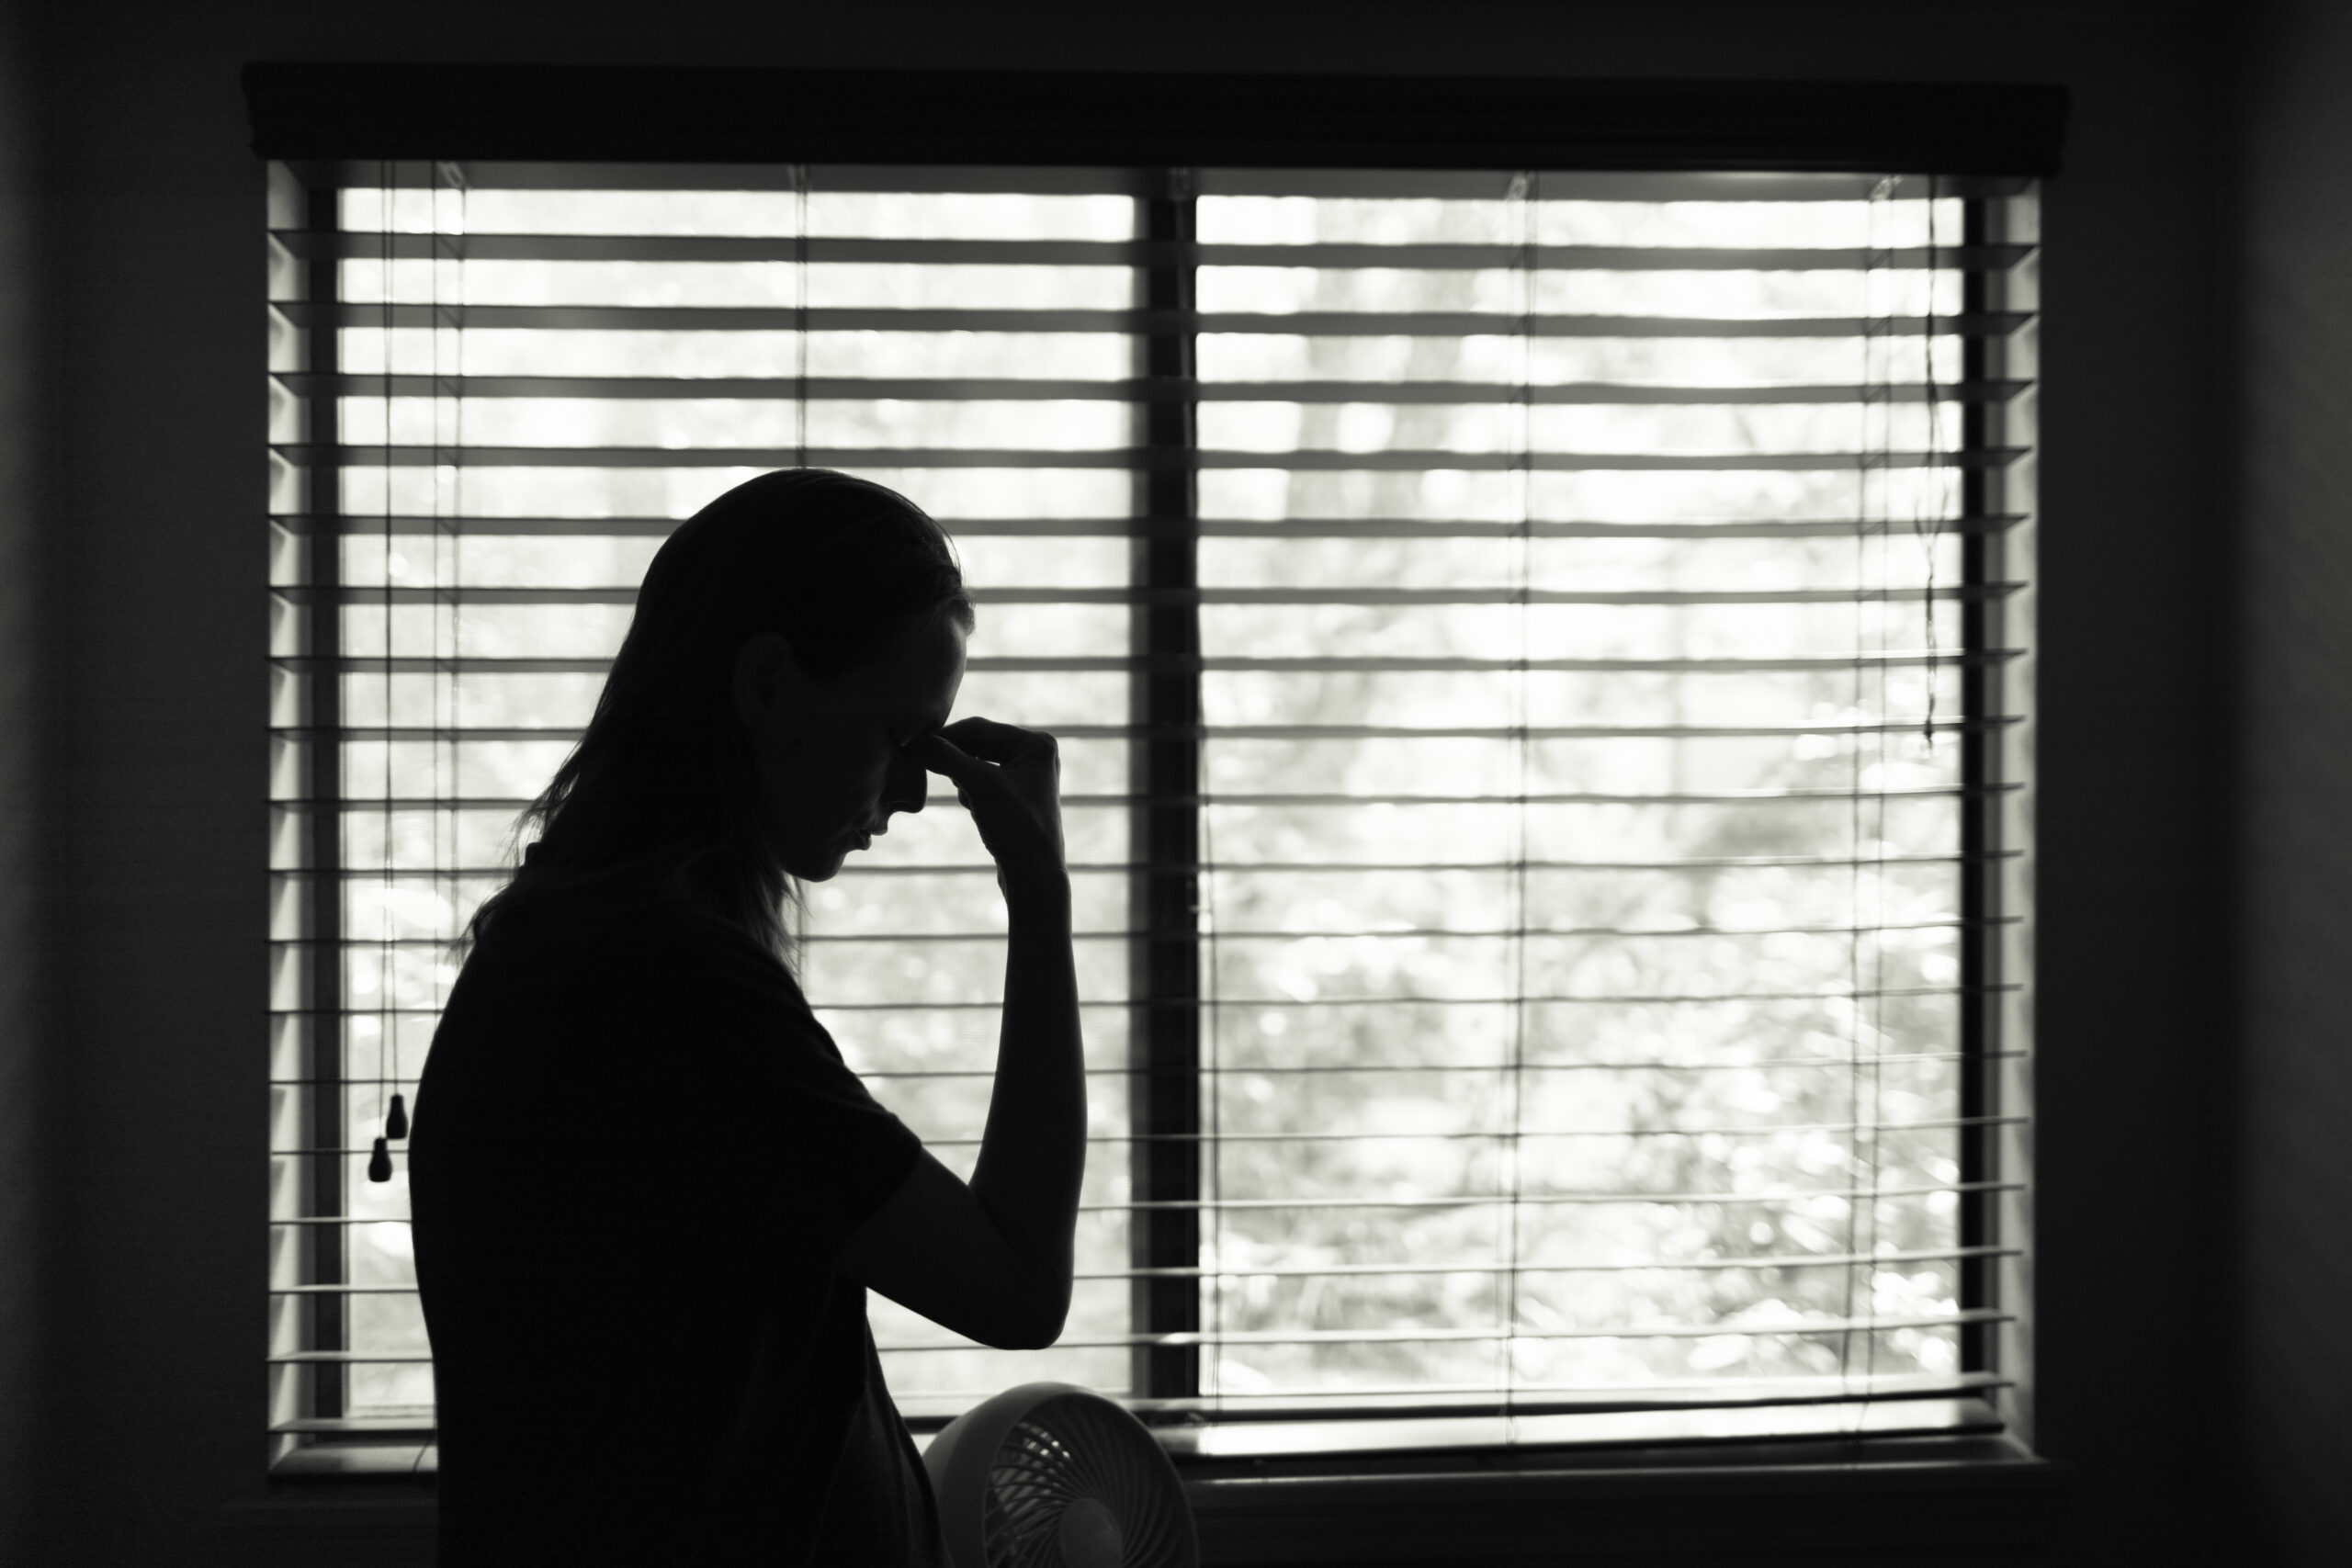 A silhouette of a stressed woman standing next to a bedroom window with her hand on her forehead.